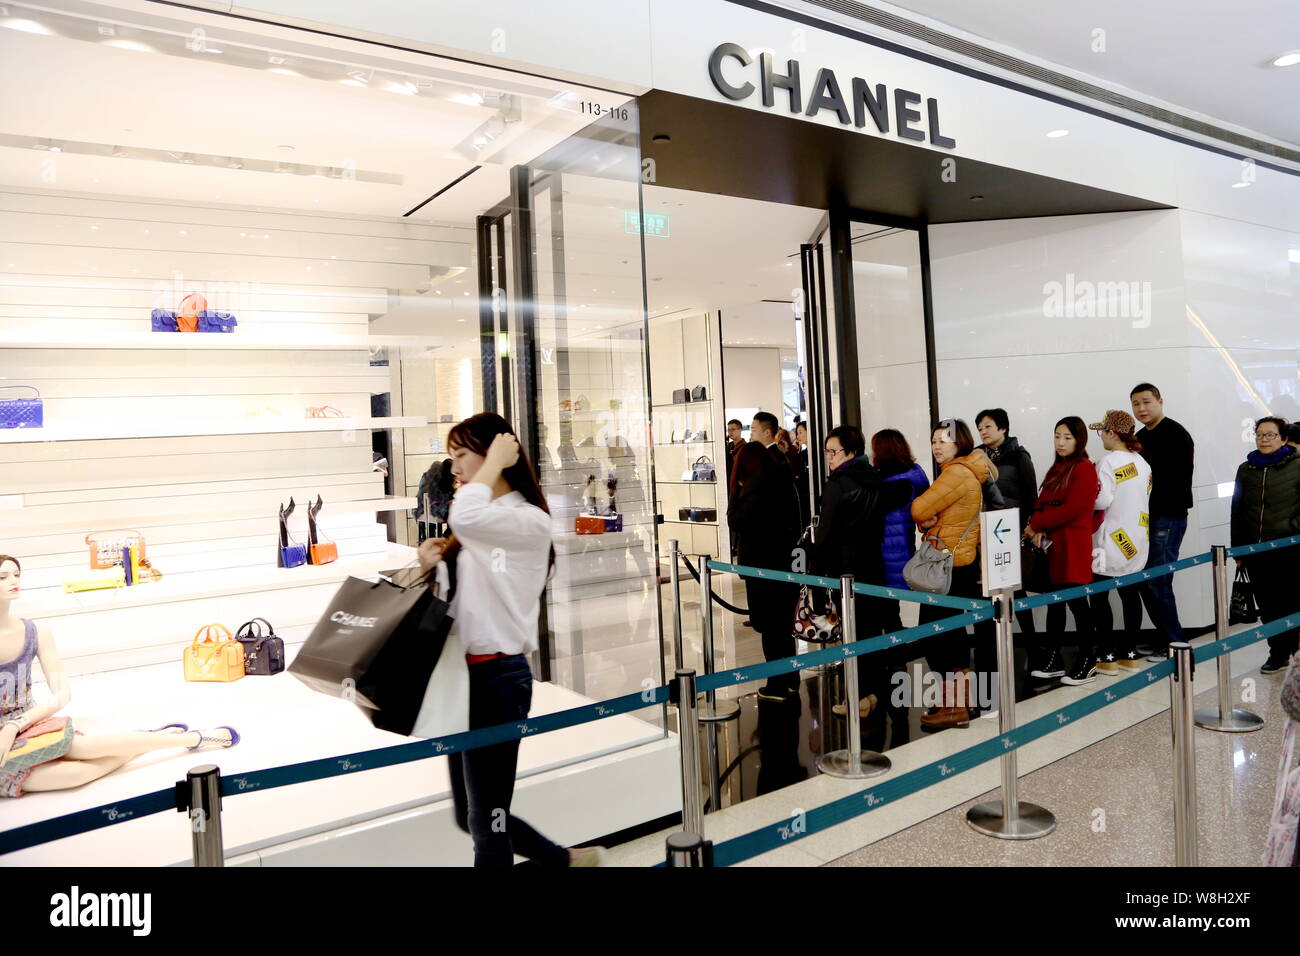 Chanel set to open private stores for premium clients